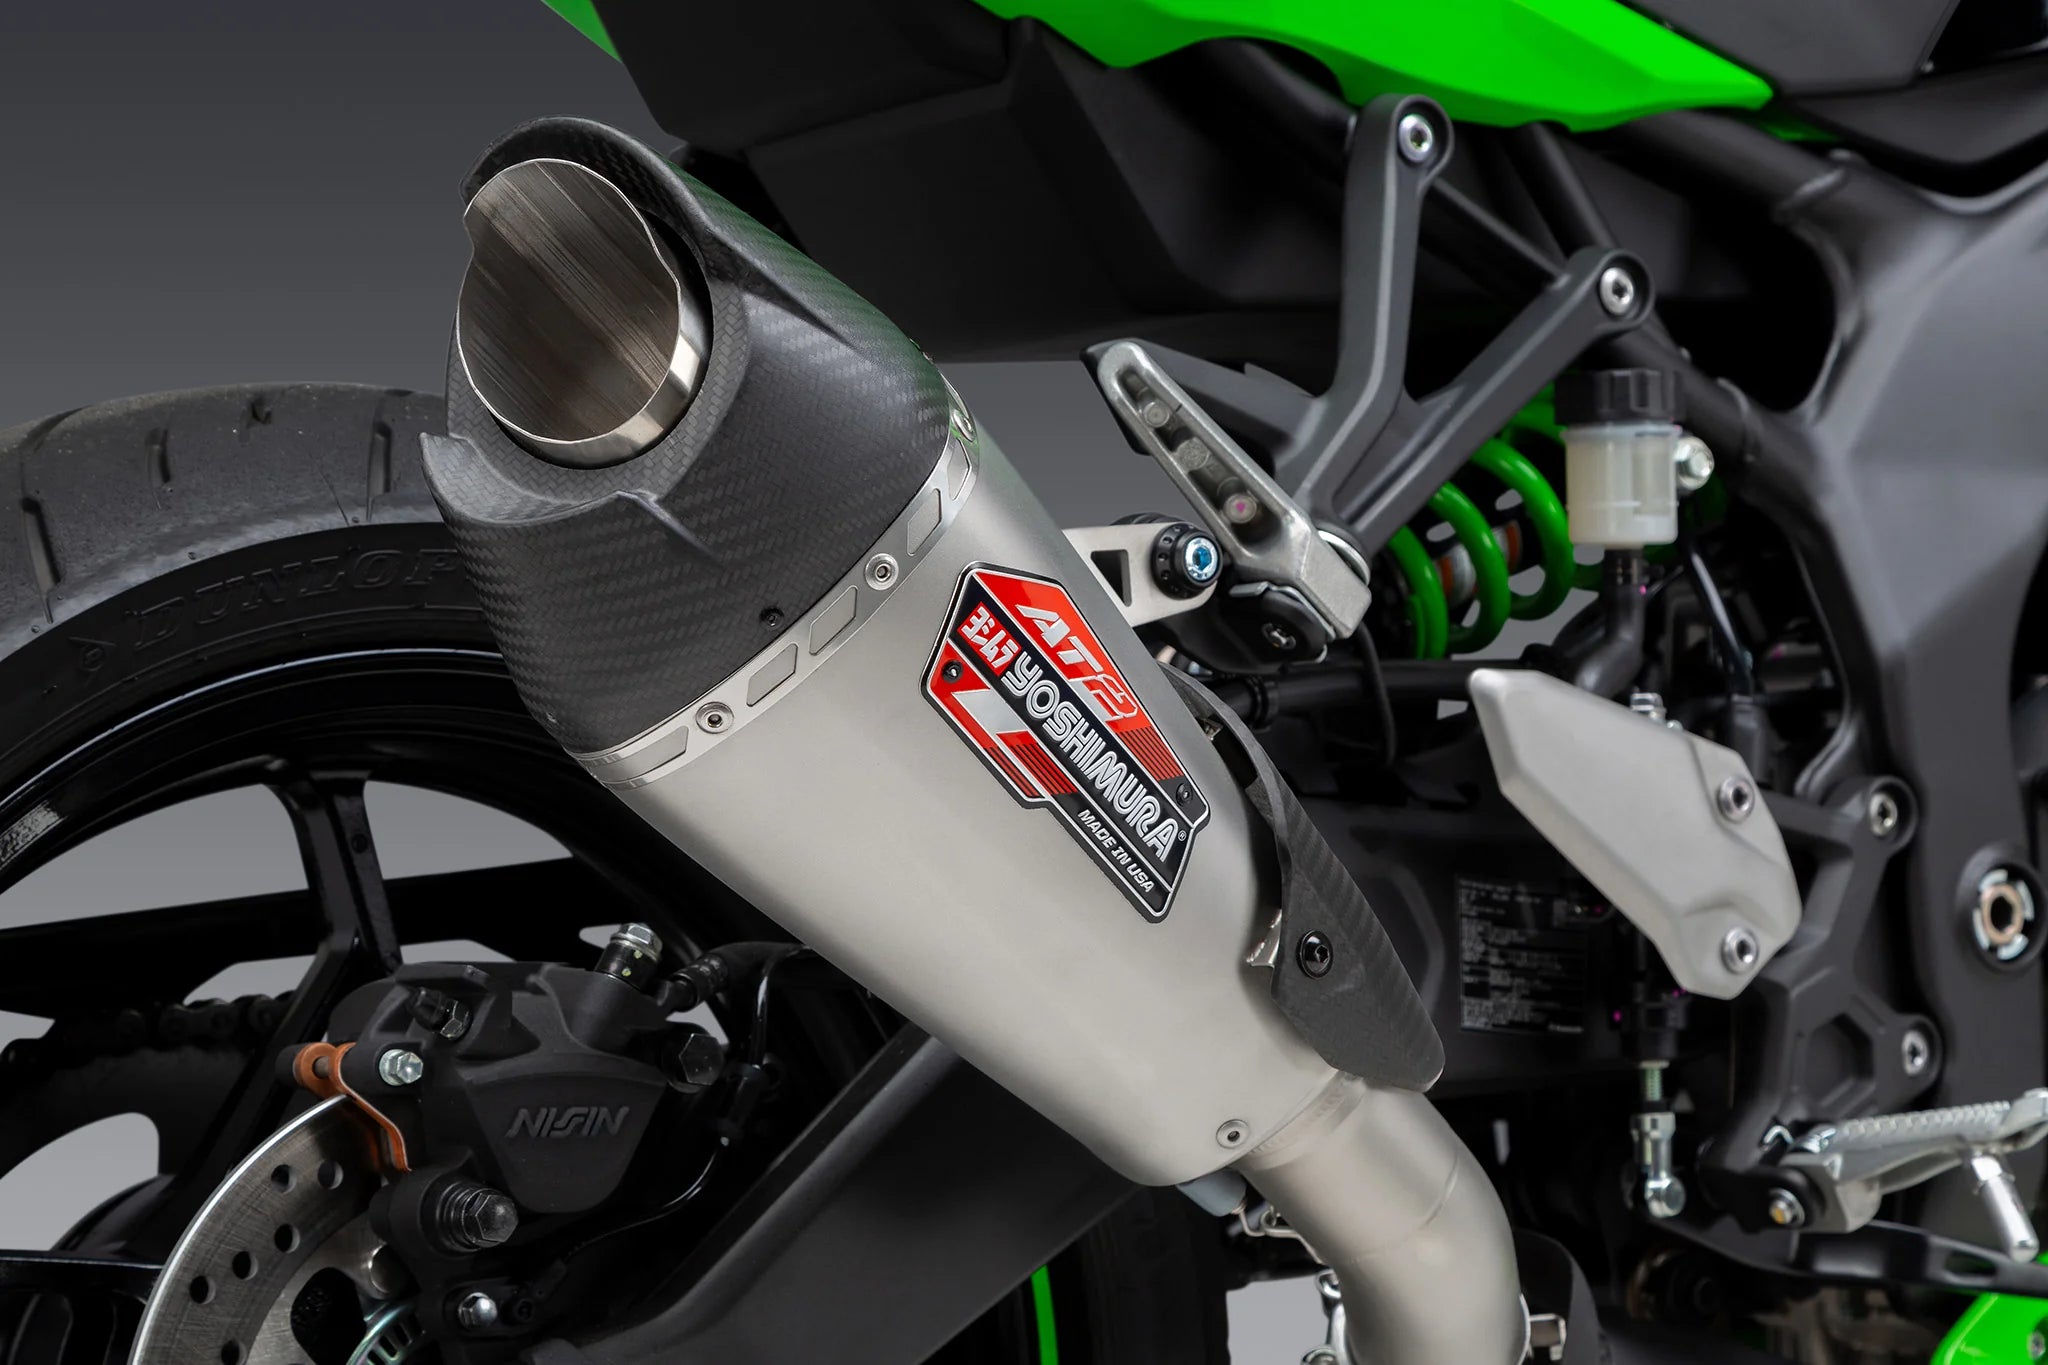 Yoshimura Zx-4rr 2023 At2 Stainless Slip-On Exhaust, Stainless Muffler